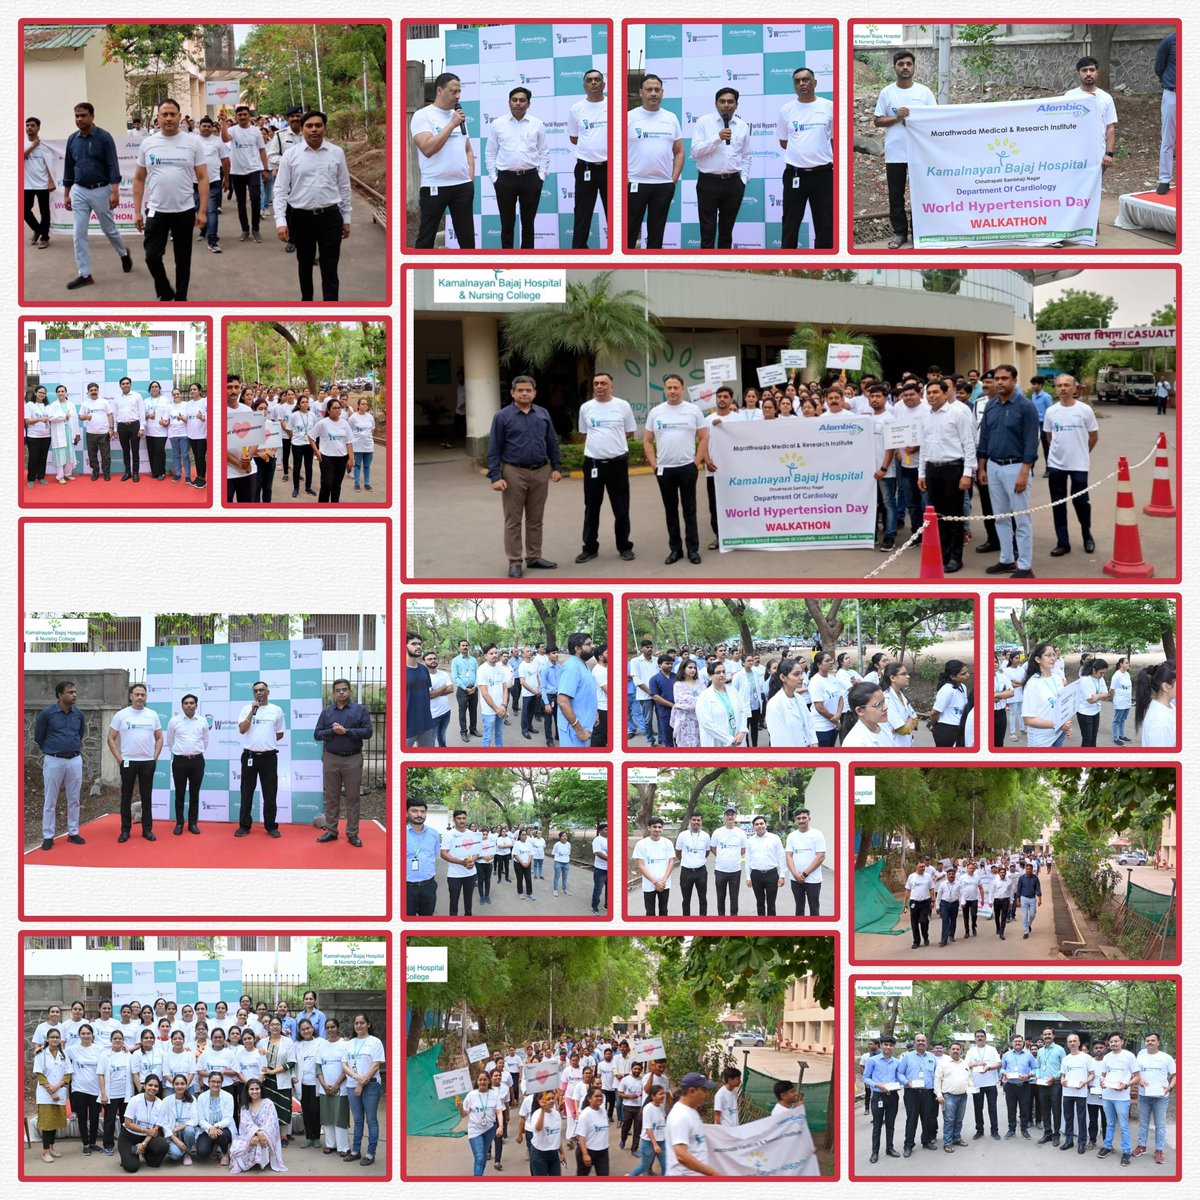 World Hypertension Day 2024!! To motivate everyone to 'Measure Your Blood Pressure Accurately, Control It, Live Longer,' a walkathon was organized by the Department of Cardiology. 🏃‍♂️🏃‍♀️ Take a look at the glimpses of this energetic and inspiring event! 🏃‍♀️🏃‍♂️ #WorldHypertensionDay